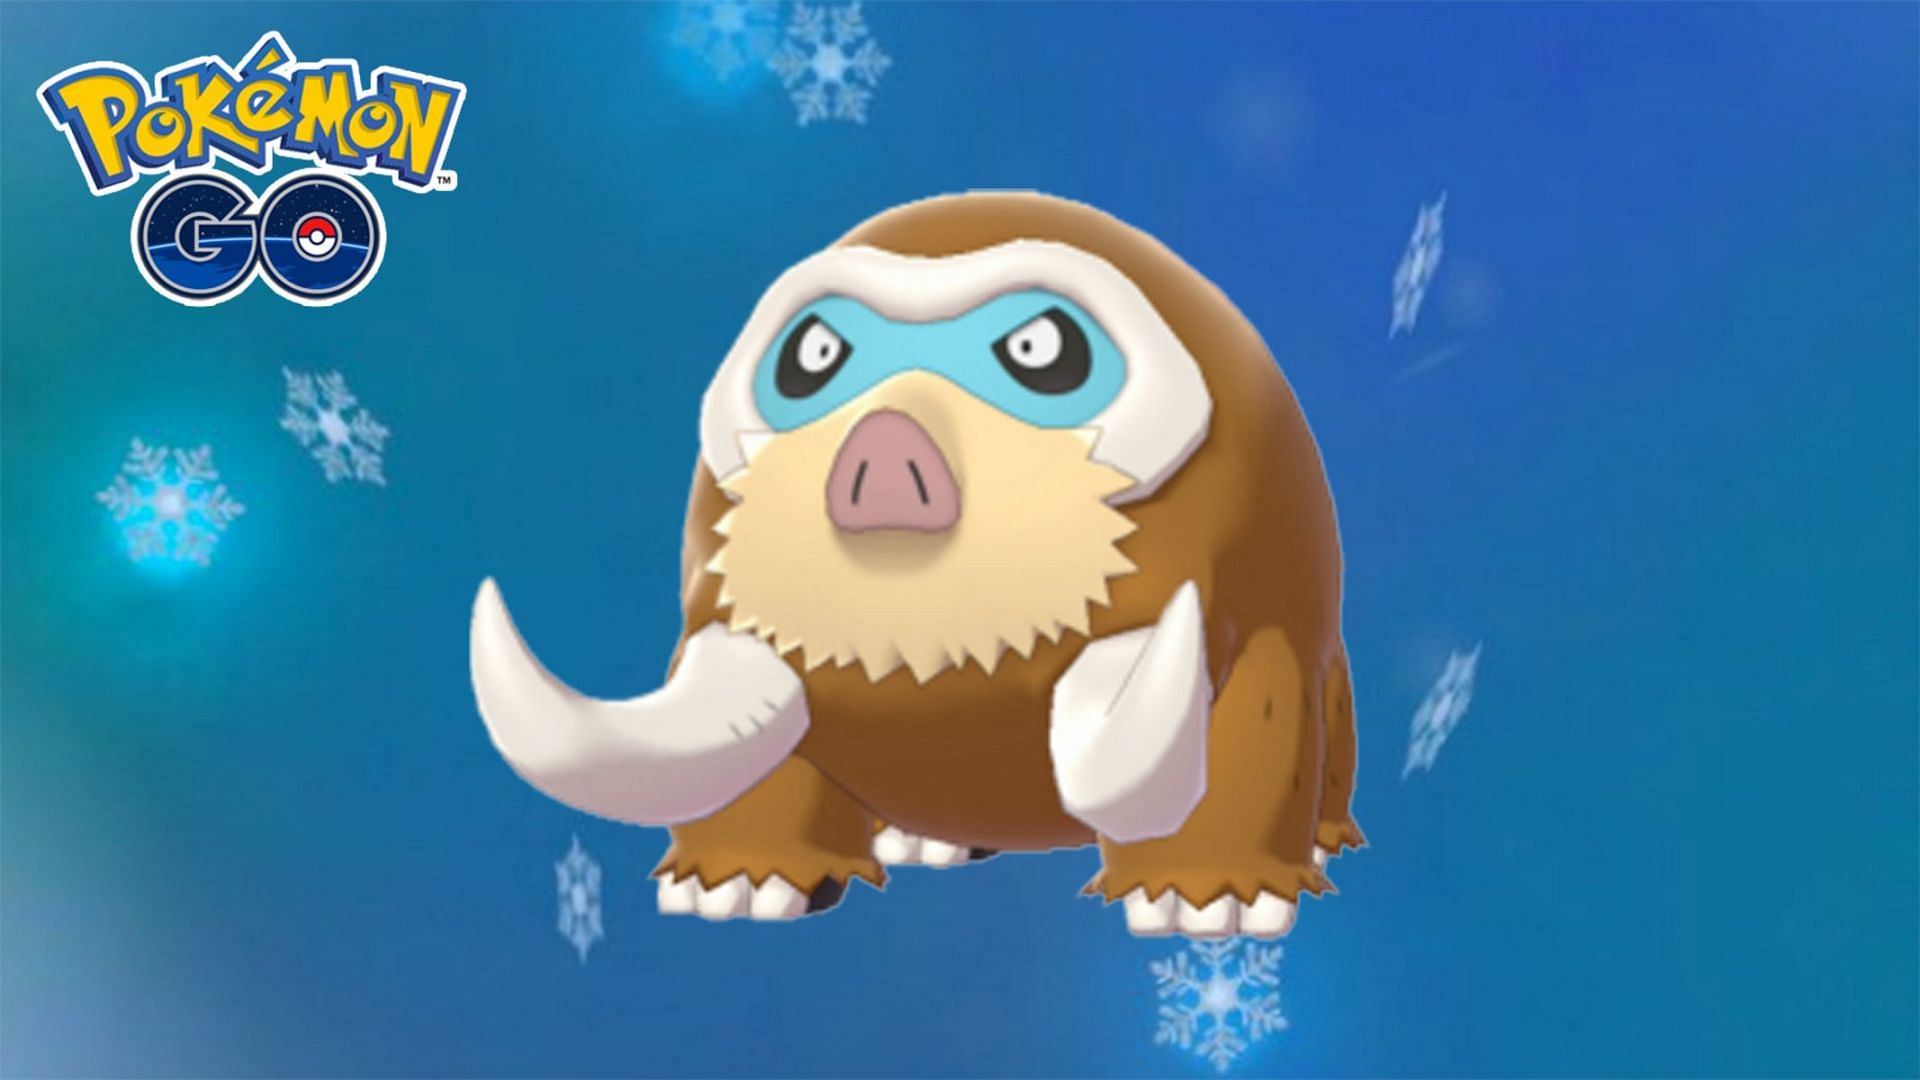 Mamoswine is a powerful fighter in Pokemon GO, but it should have optimized moves for maximum effect (Image via Niantic)